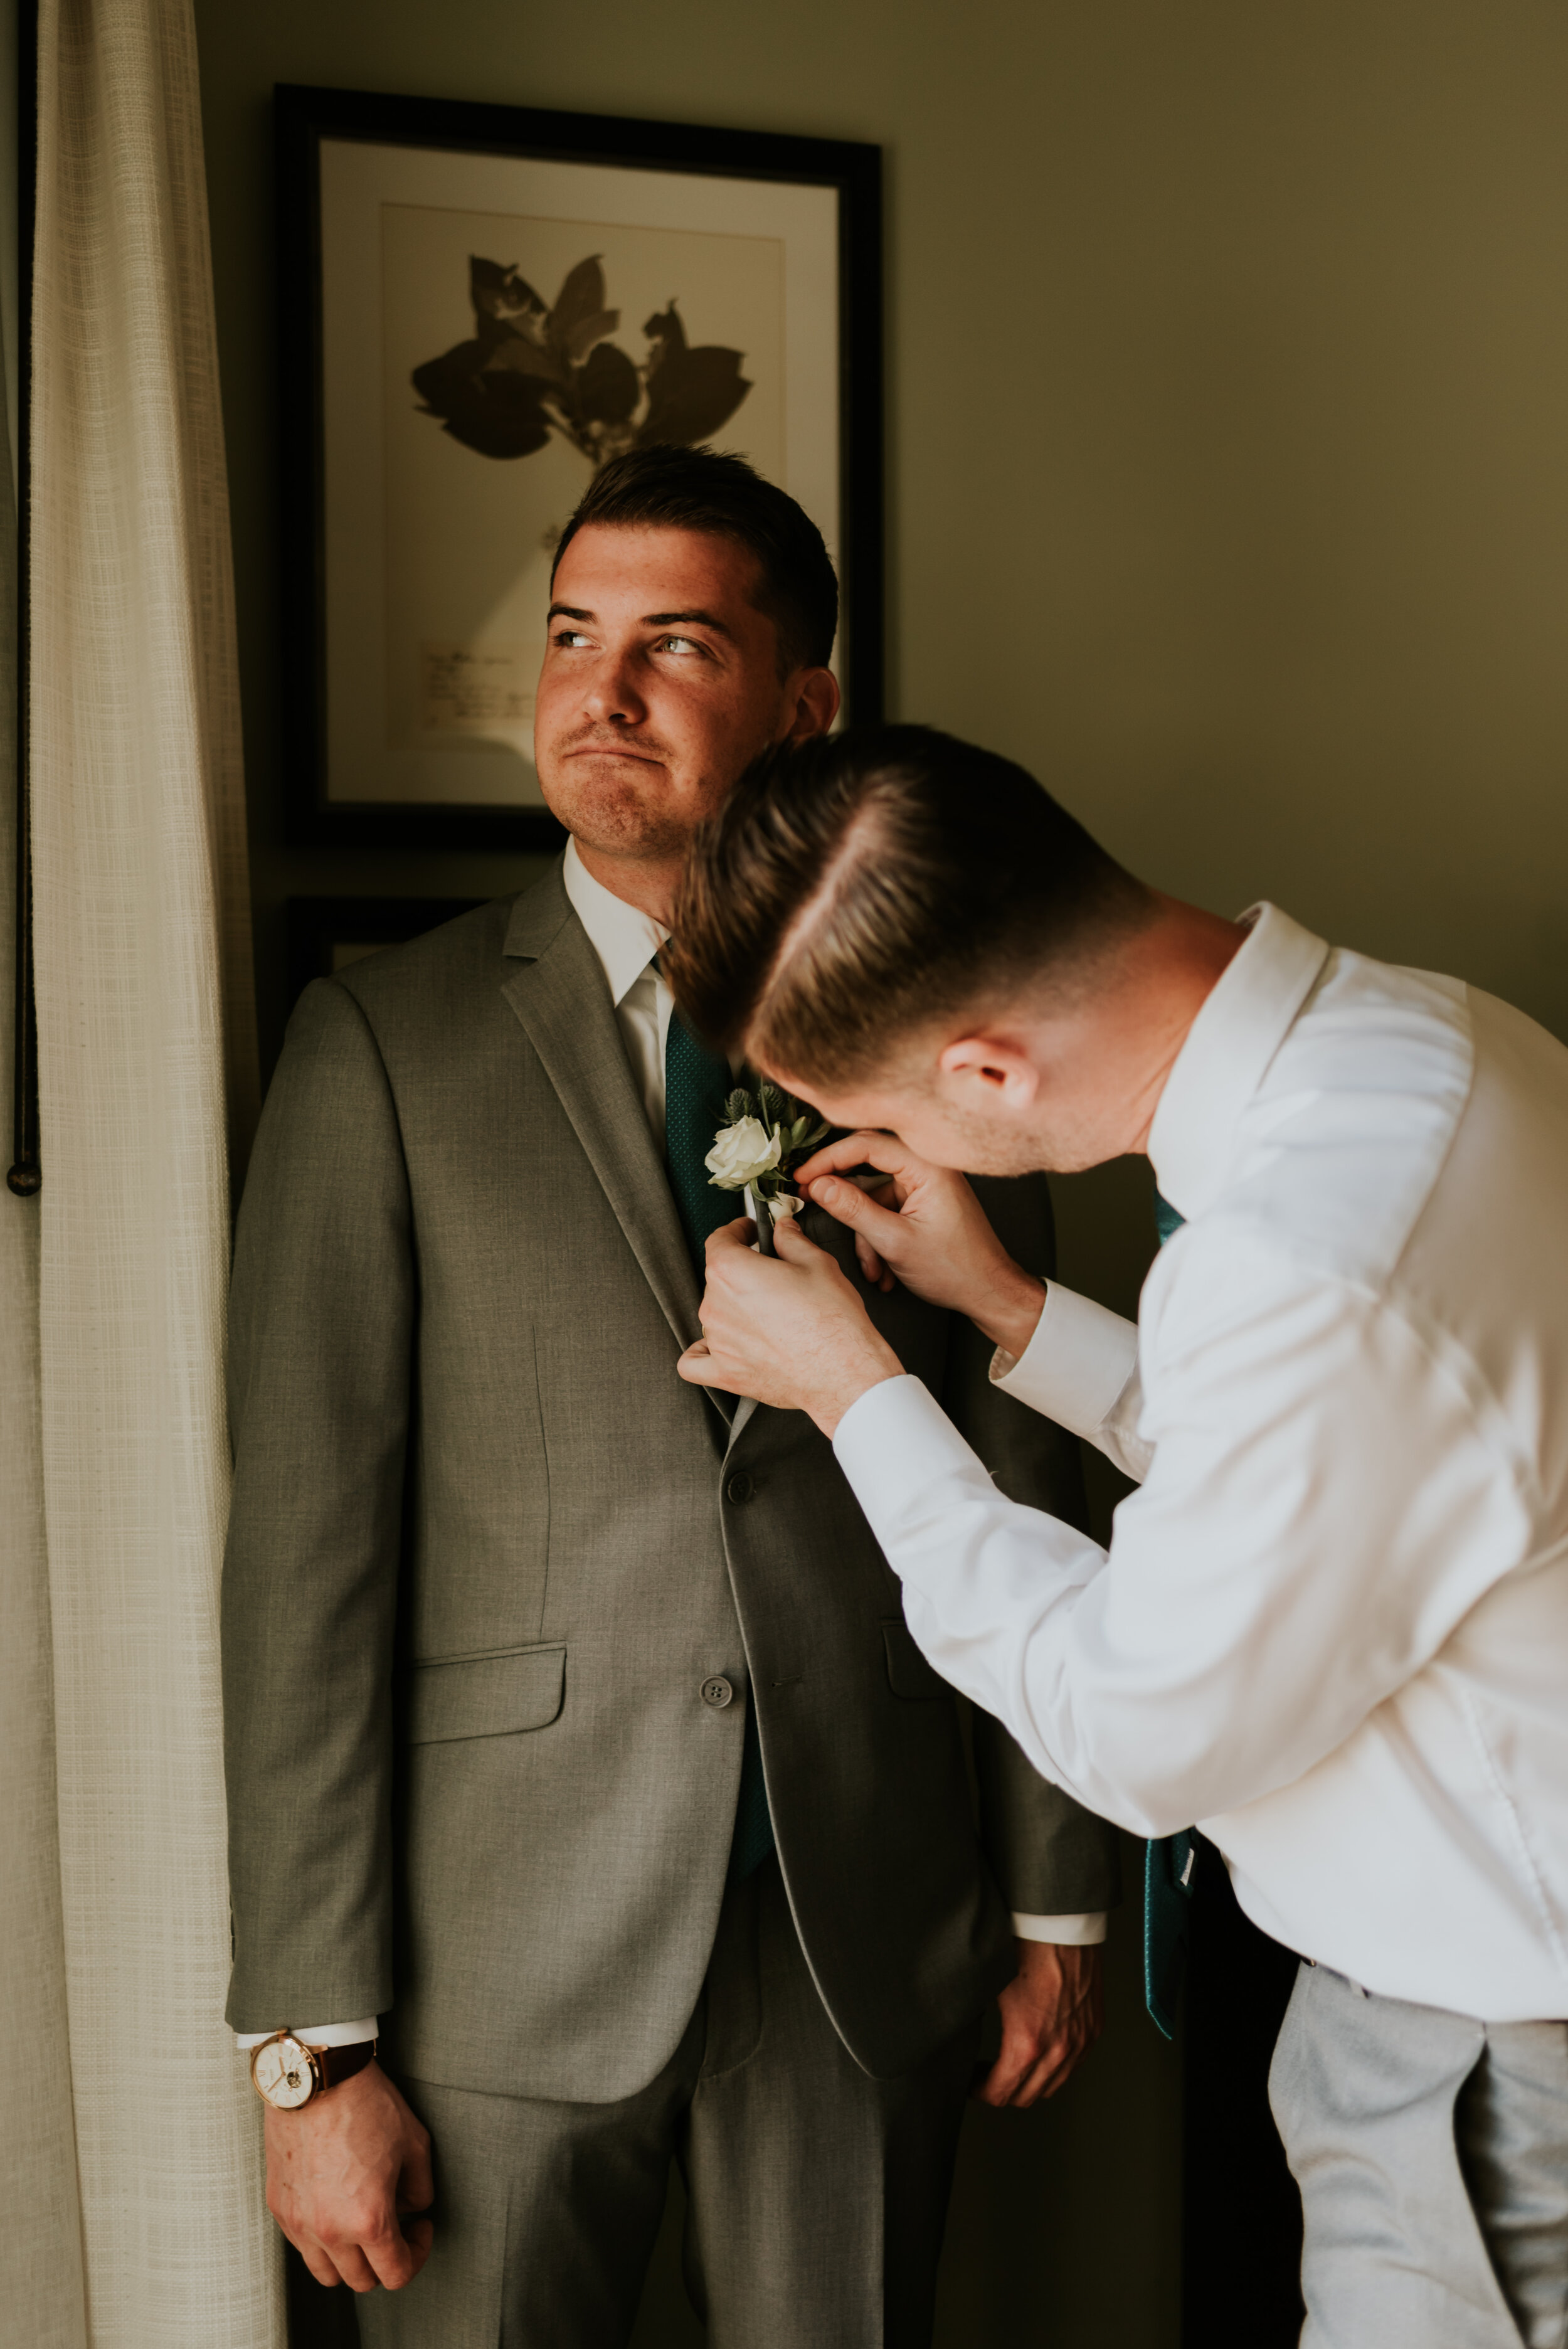 How to Include Your Family in Your Elopement | Eloping with Family | Elopement with Guests | California Elopement Photographer | Elopement Tips | Elopement Planning Advice | Intimate Wedding